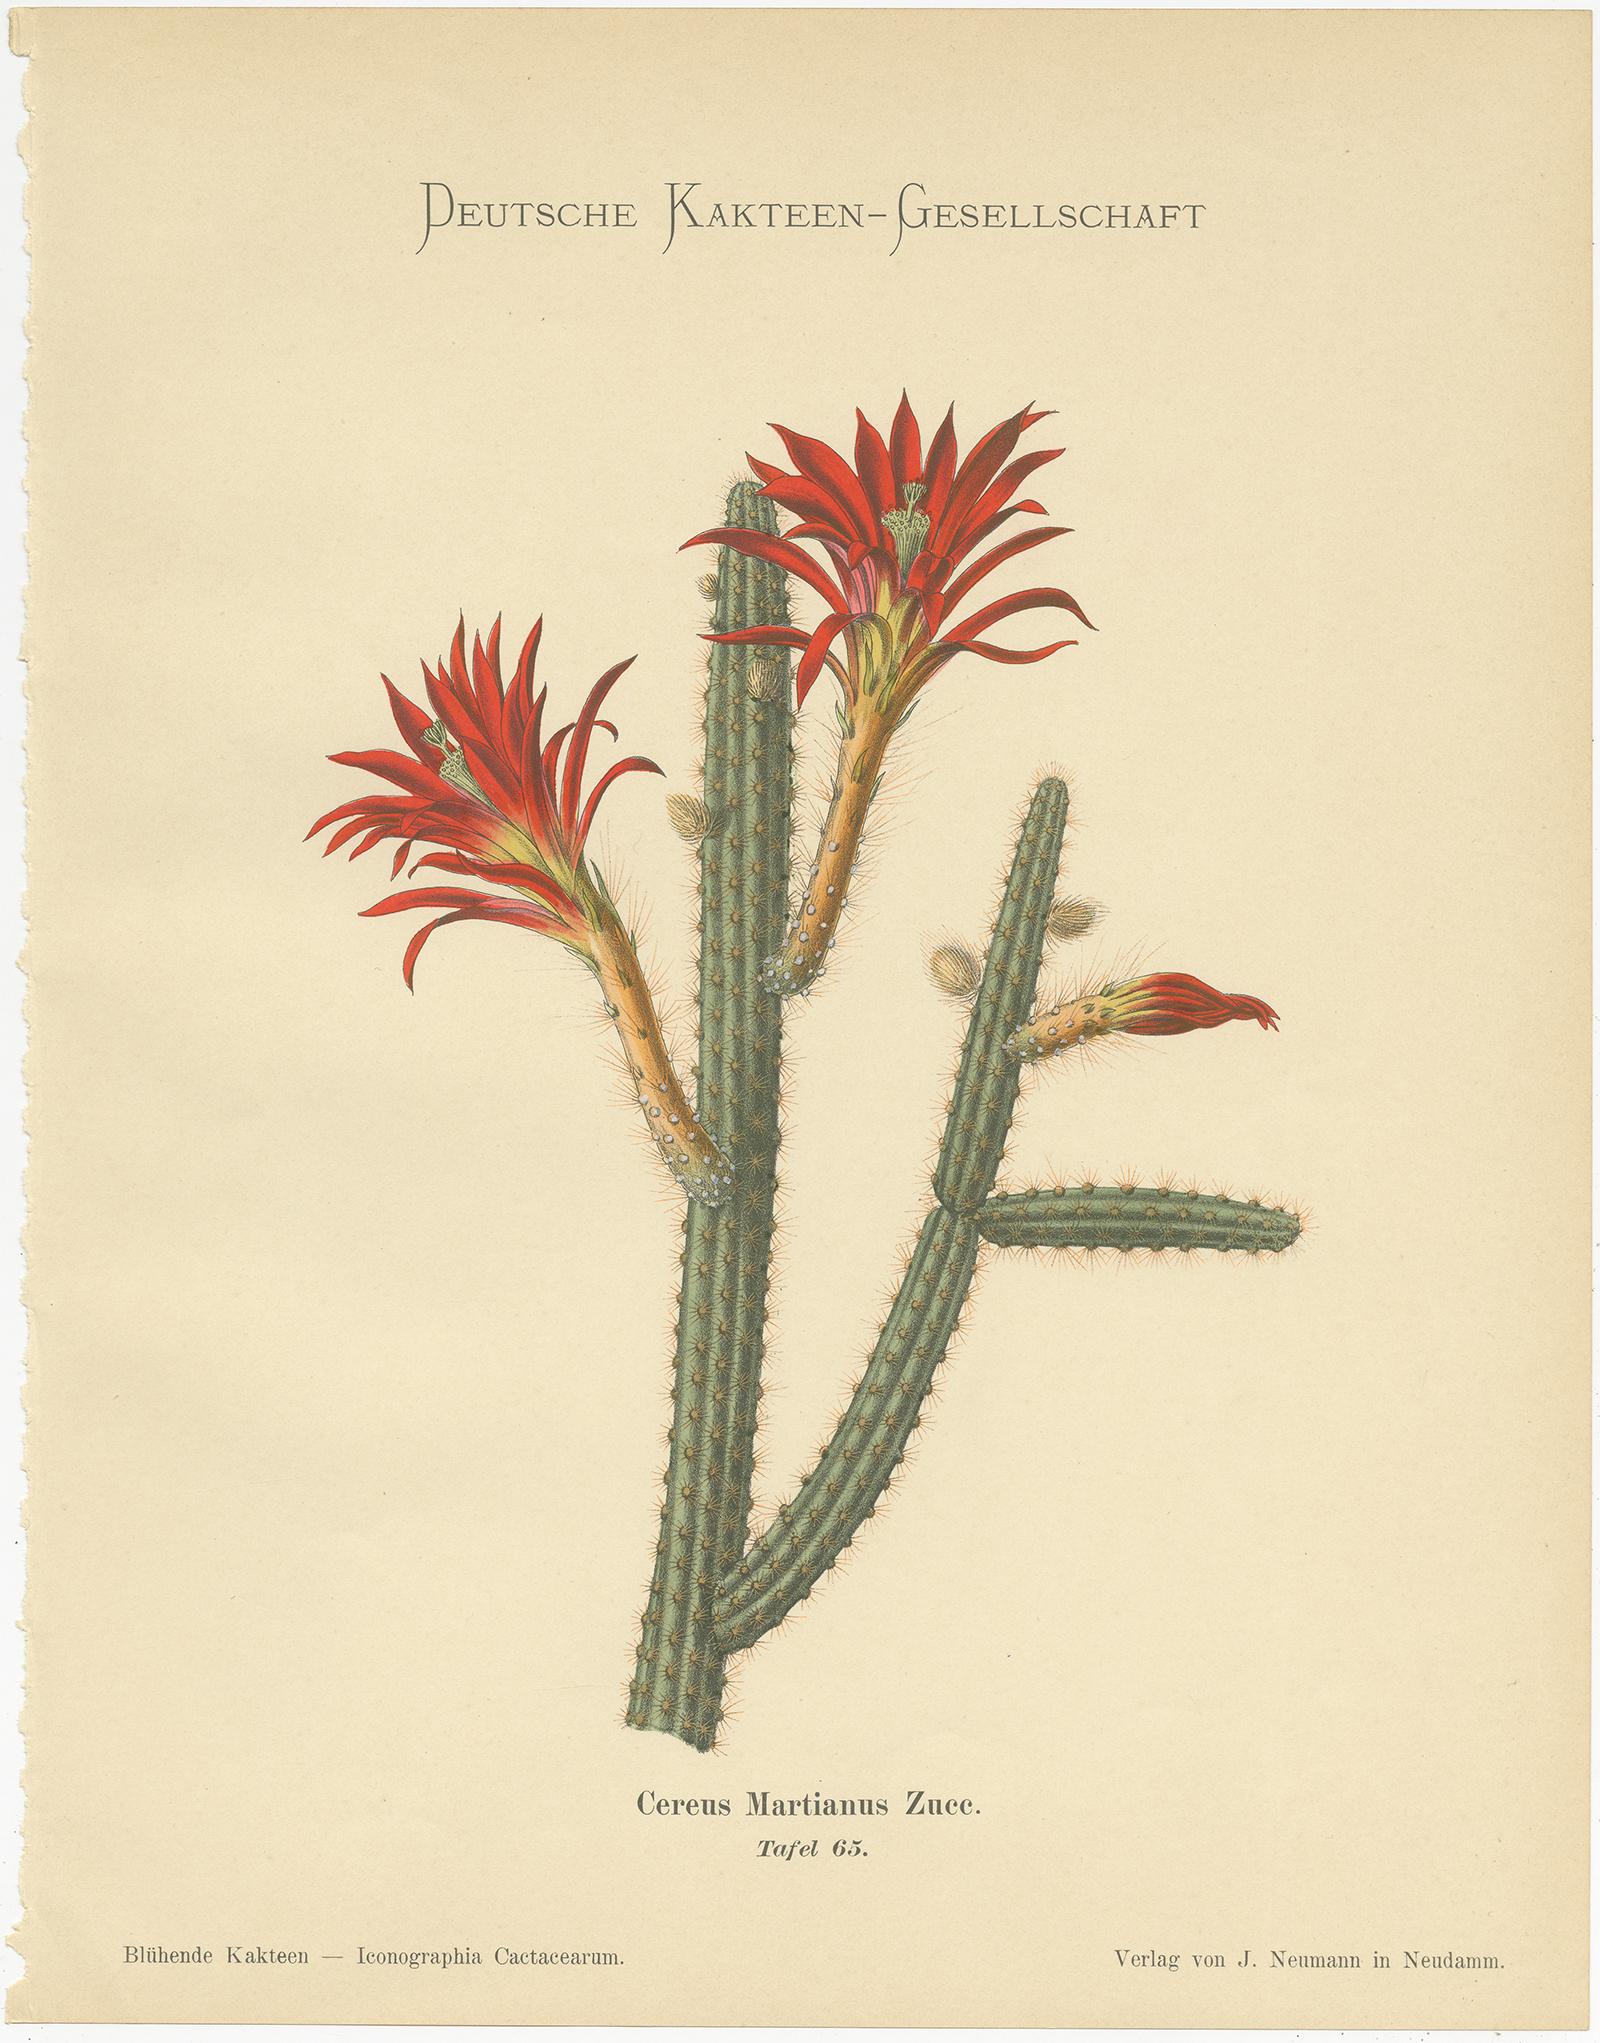 Set of four antique cactus prints depicting the Cereus Martianus, Echinocereus Polyacanthus, Echinocactus Jussieni and the Mamillaria Gracilis. These prints originate from 'Blühende Kakteen' by K. Schumann and M. Gürke. Published 1900-1905.